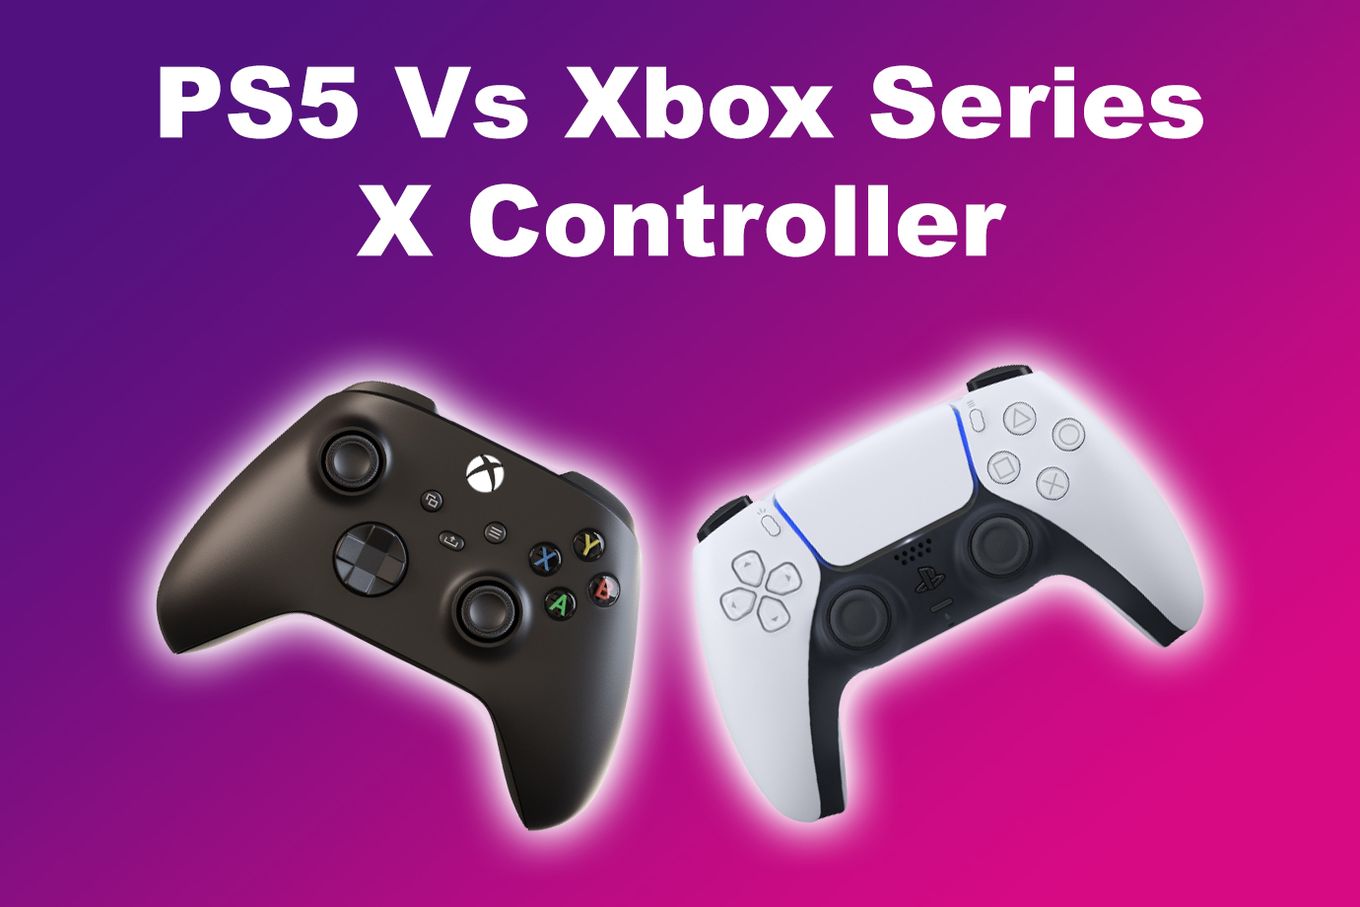 PS5 v Xbox Series X: which has the best features, games and price